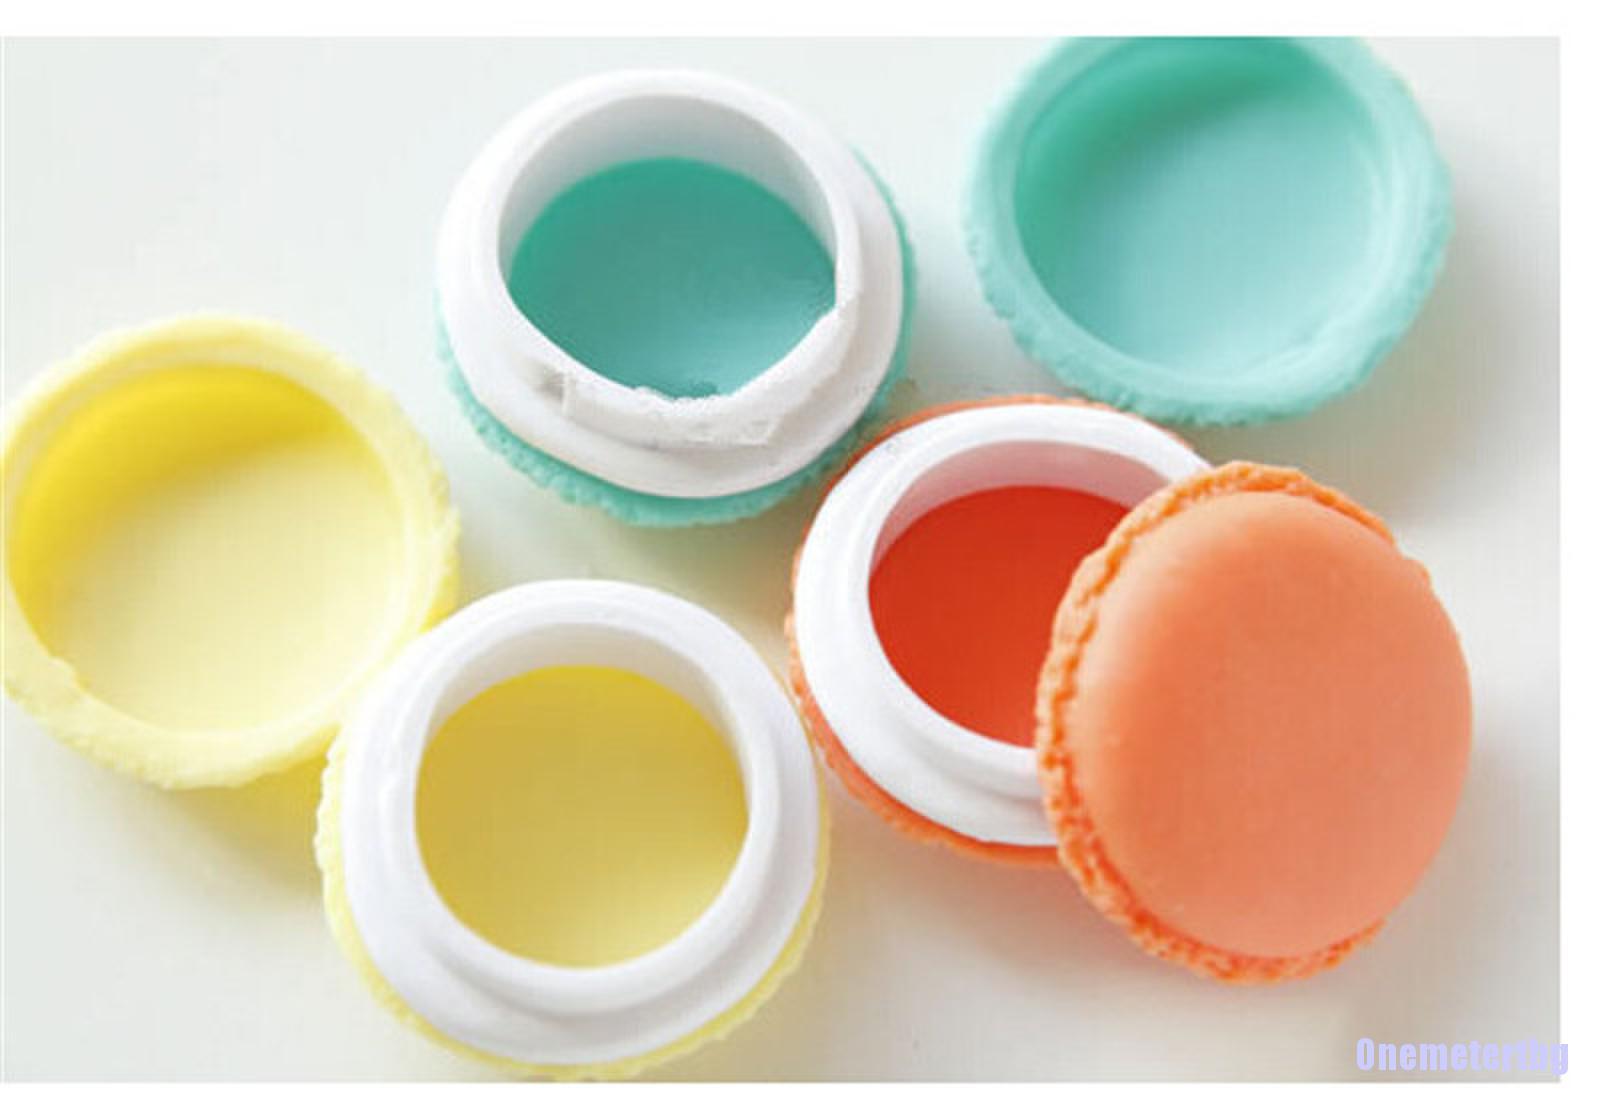 Details about   6pcs Mini Pill Box Candy Color For Jewelry Earring Boxs Outing Storage Boxe